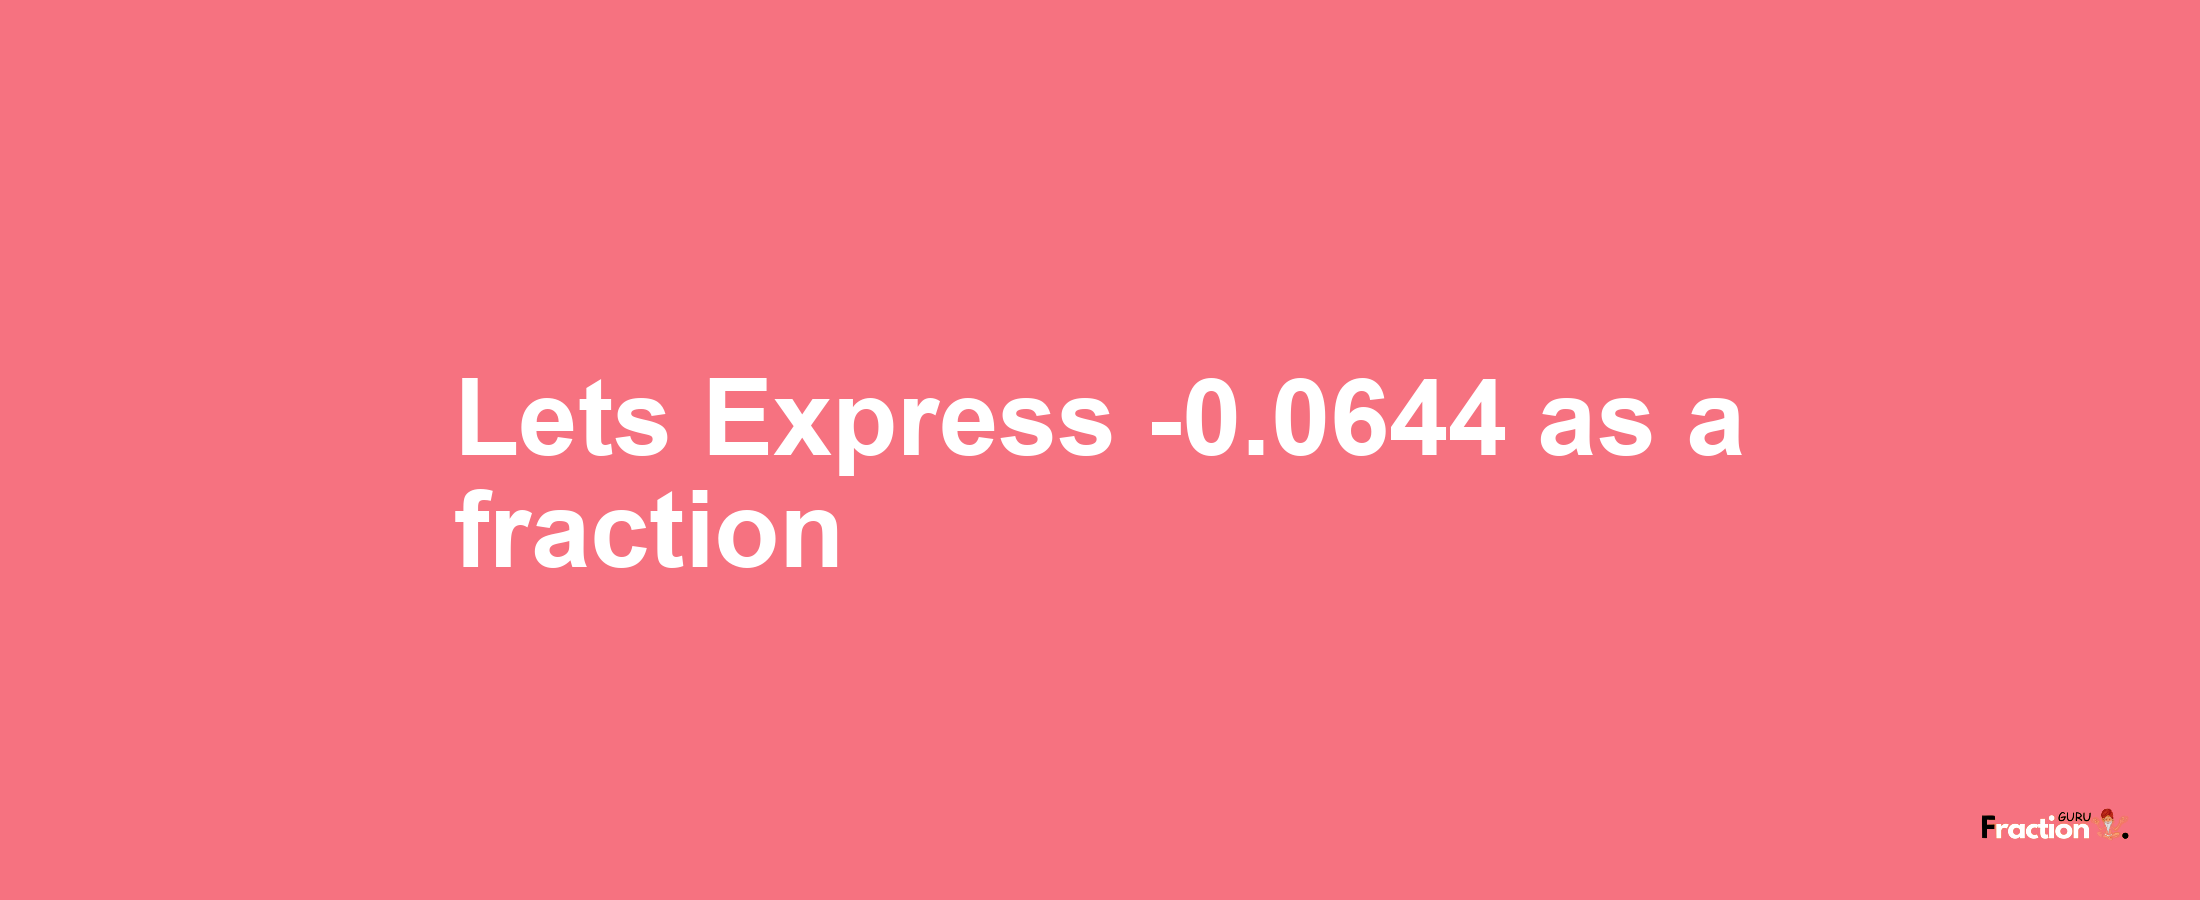 Lets Express -0.0644 as afraction